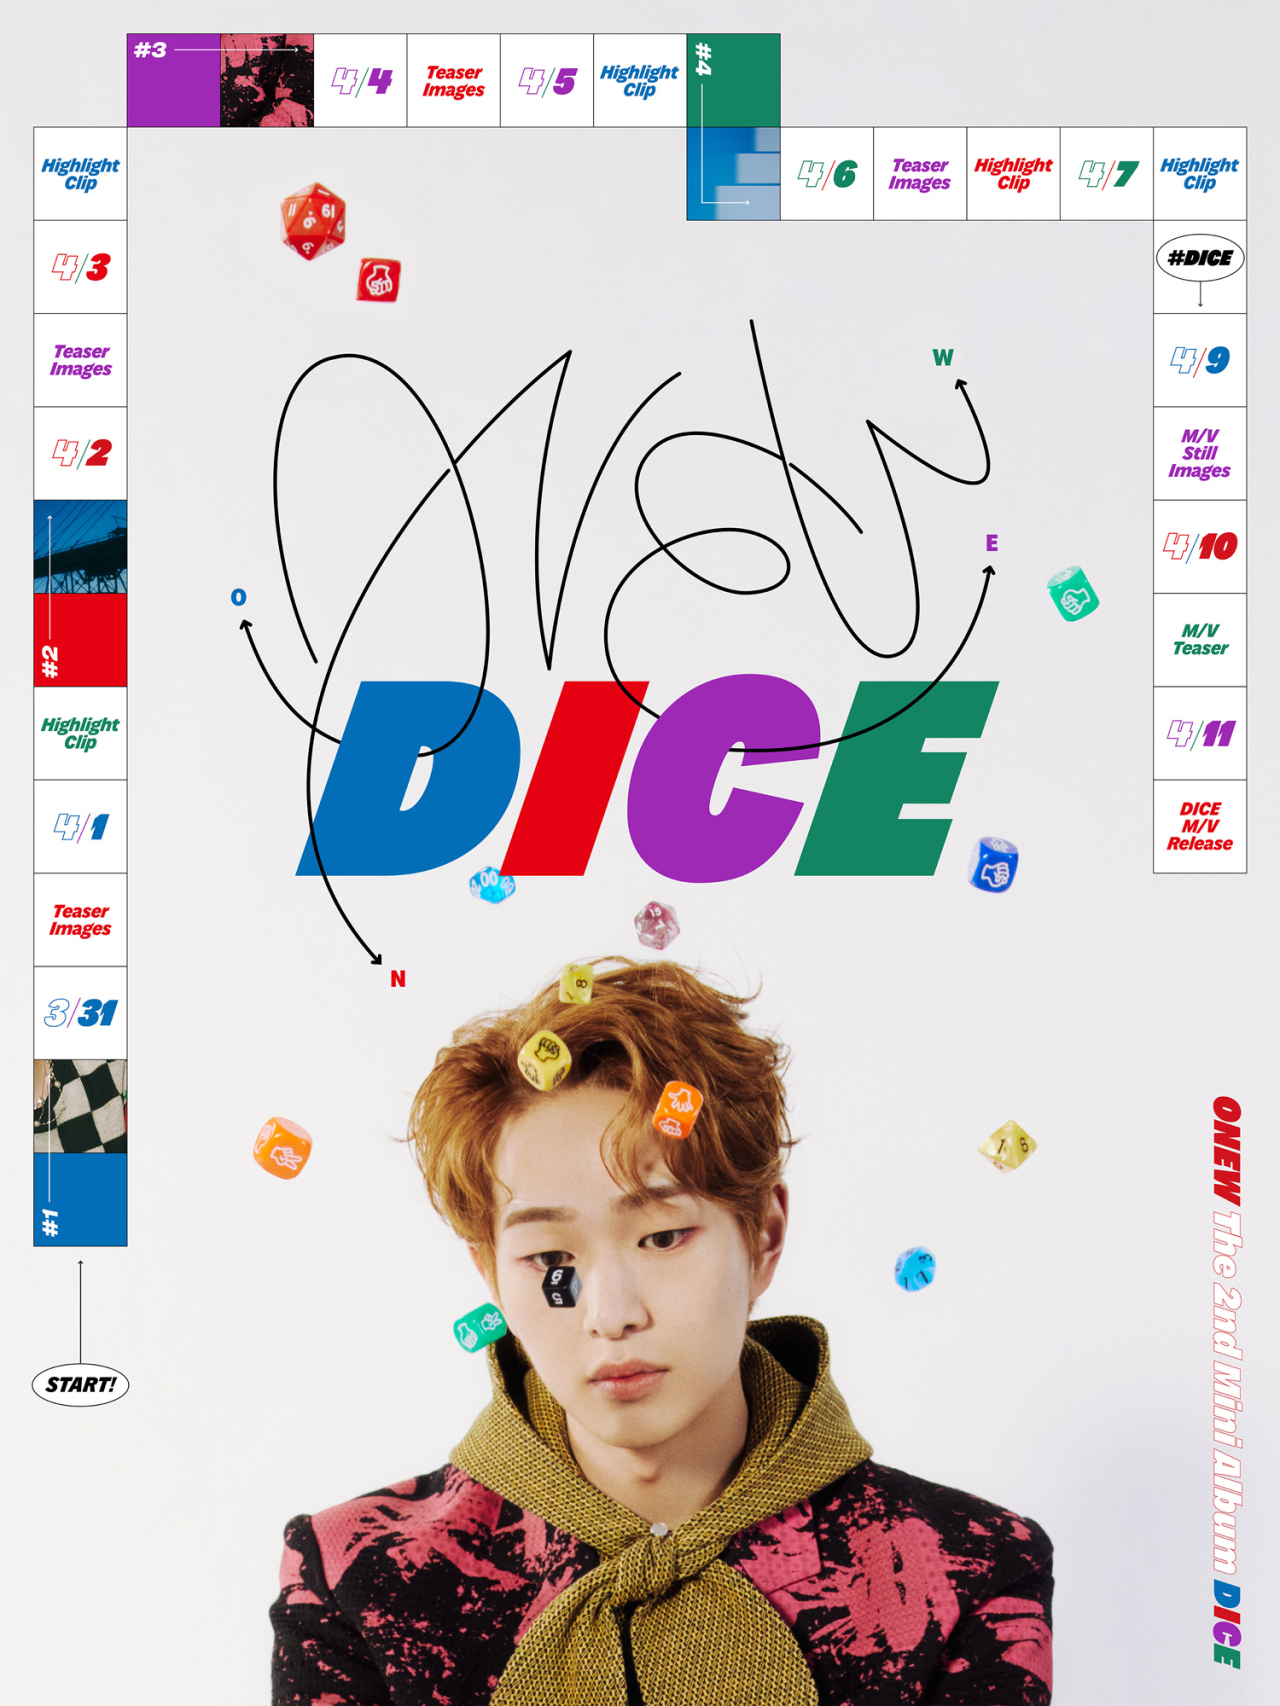 Teaser image for Onew’s second EP, “Dice” (S.M. Entertainment)